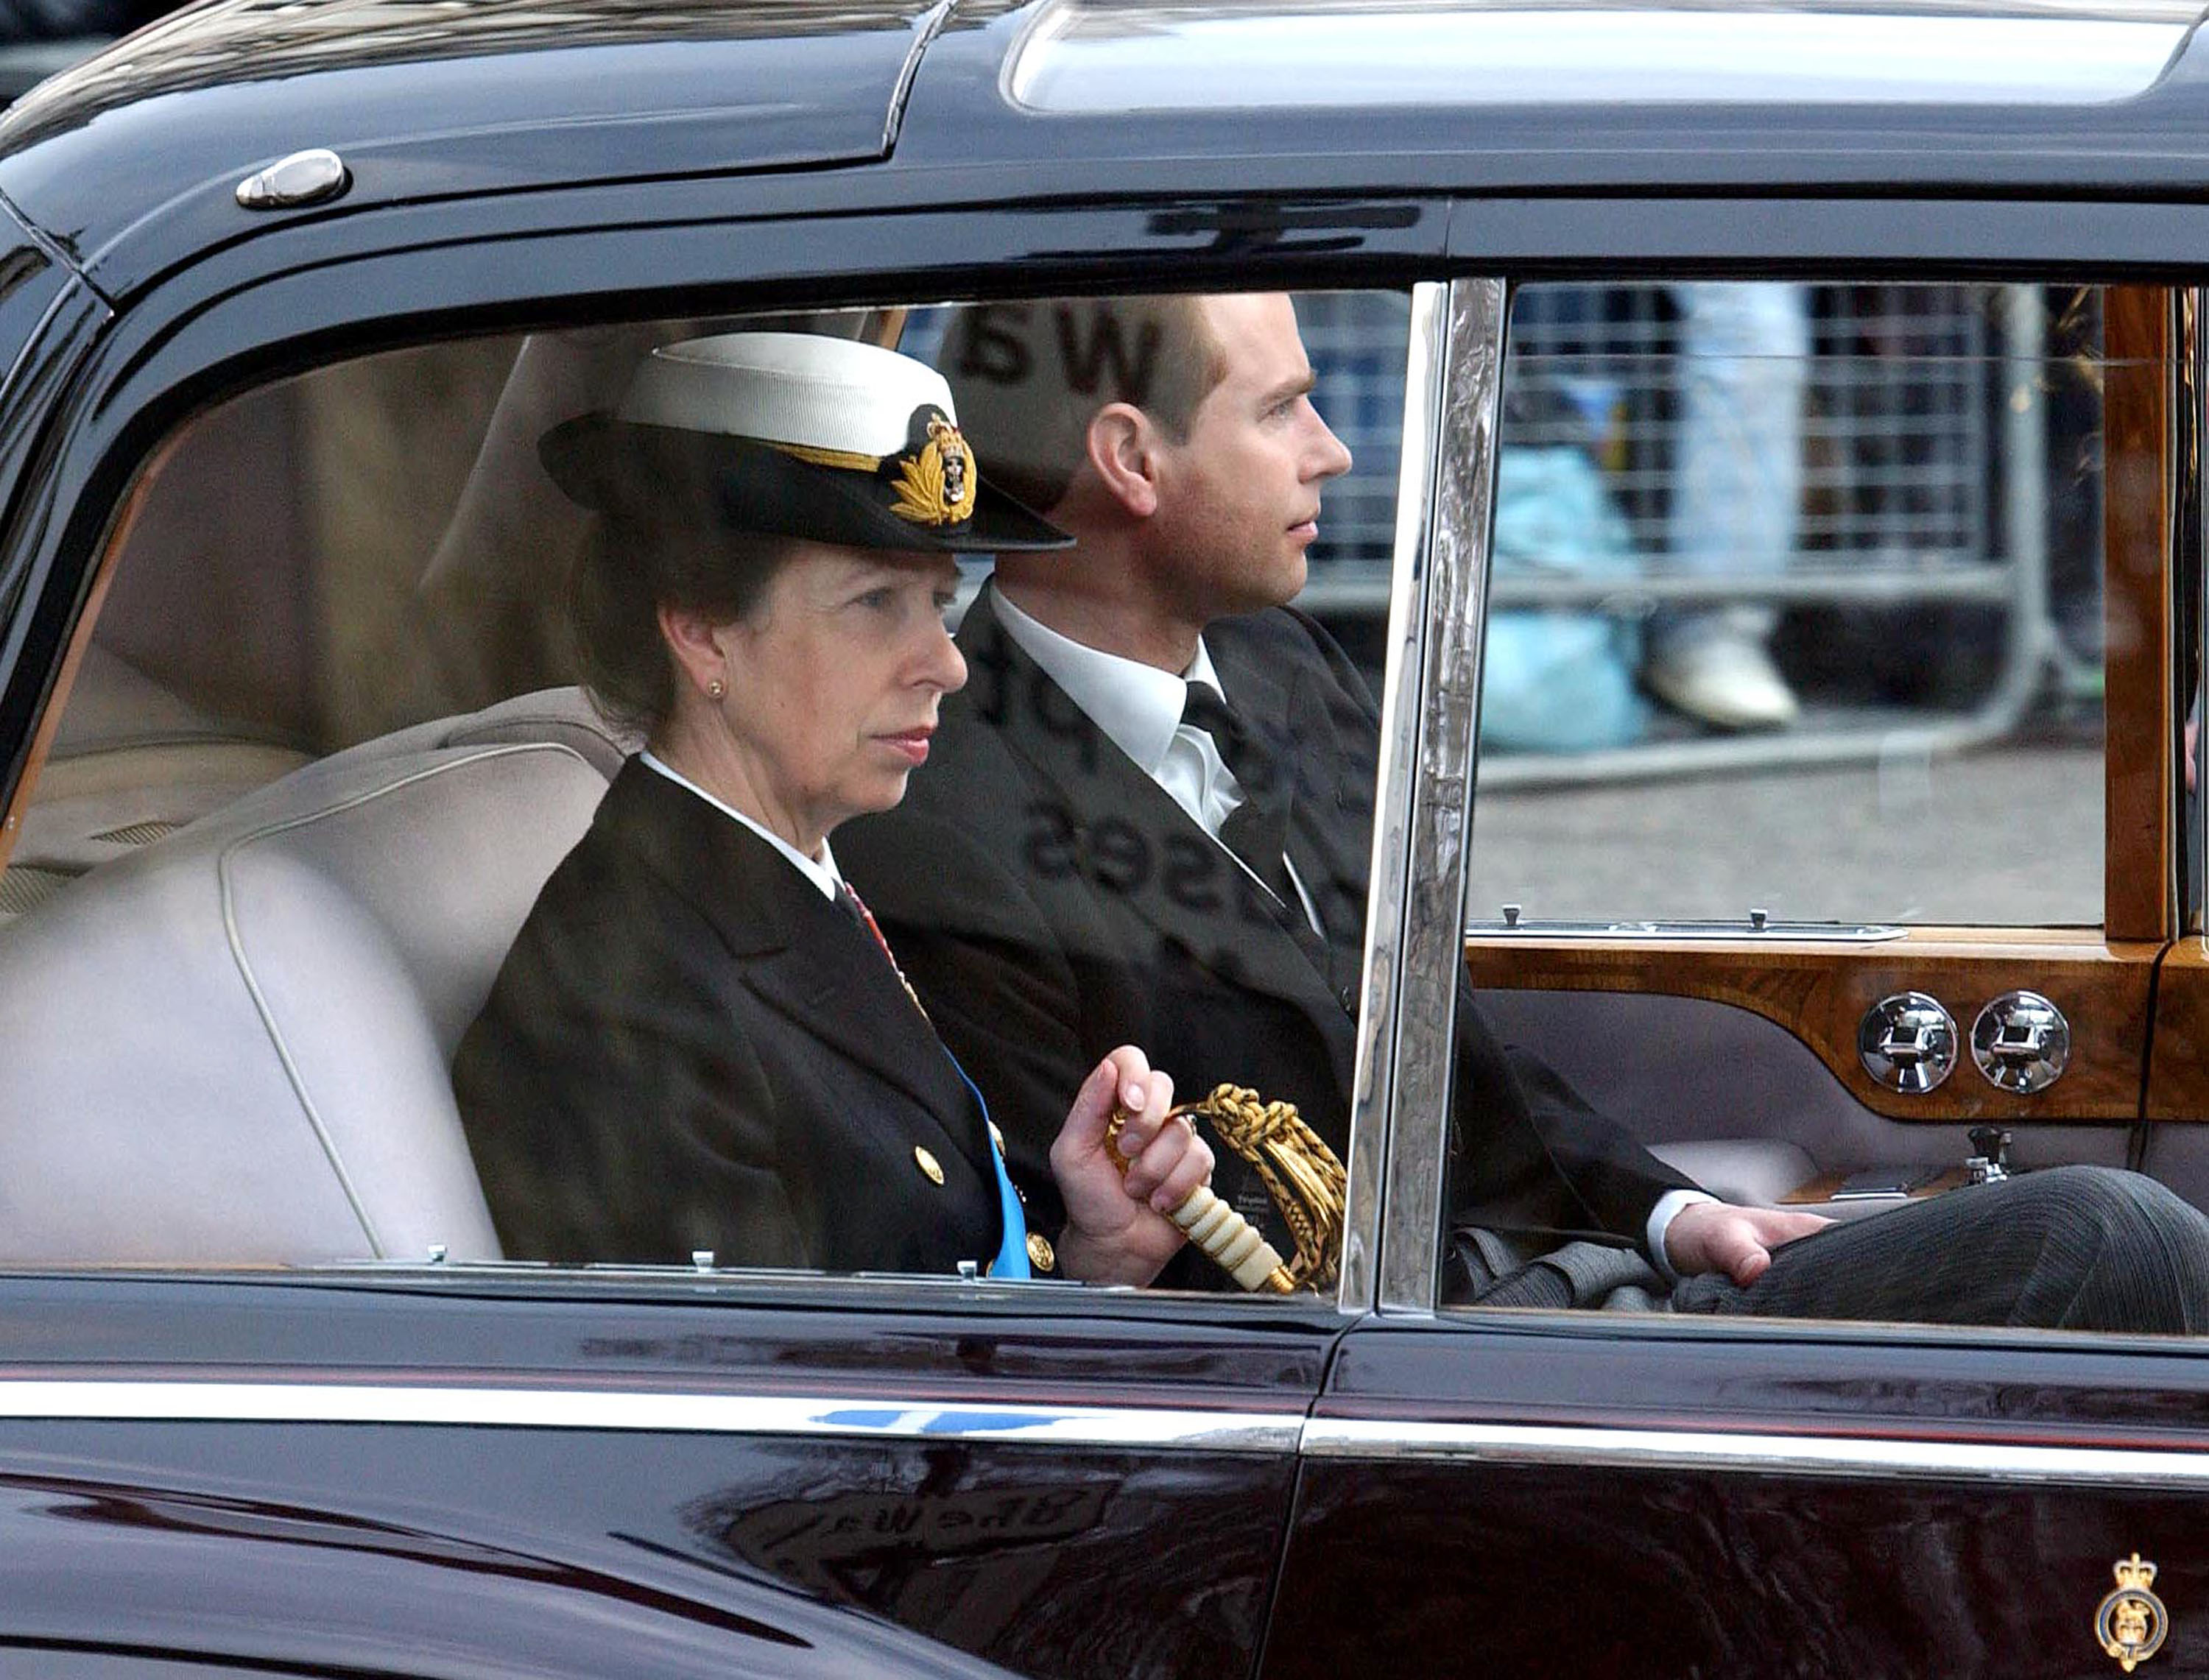 Princess Anne spotted inside the Royal car on the streets of UK. | Photo: Getty Images